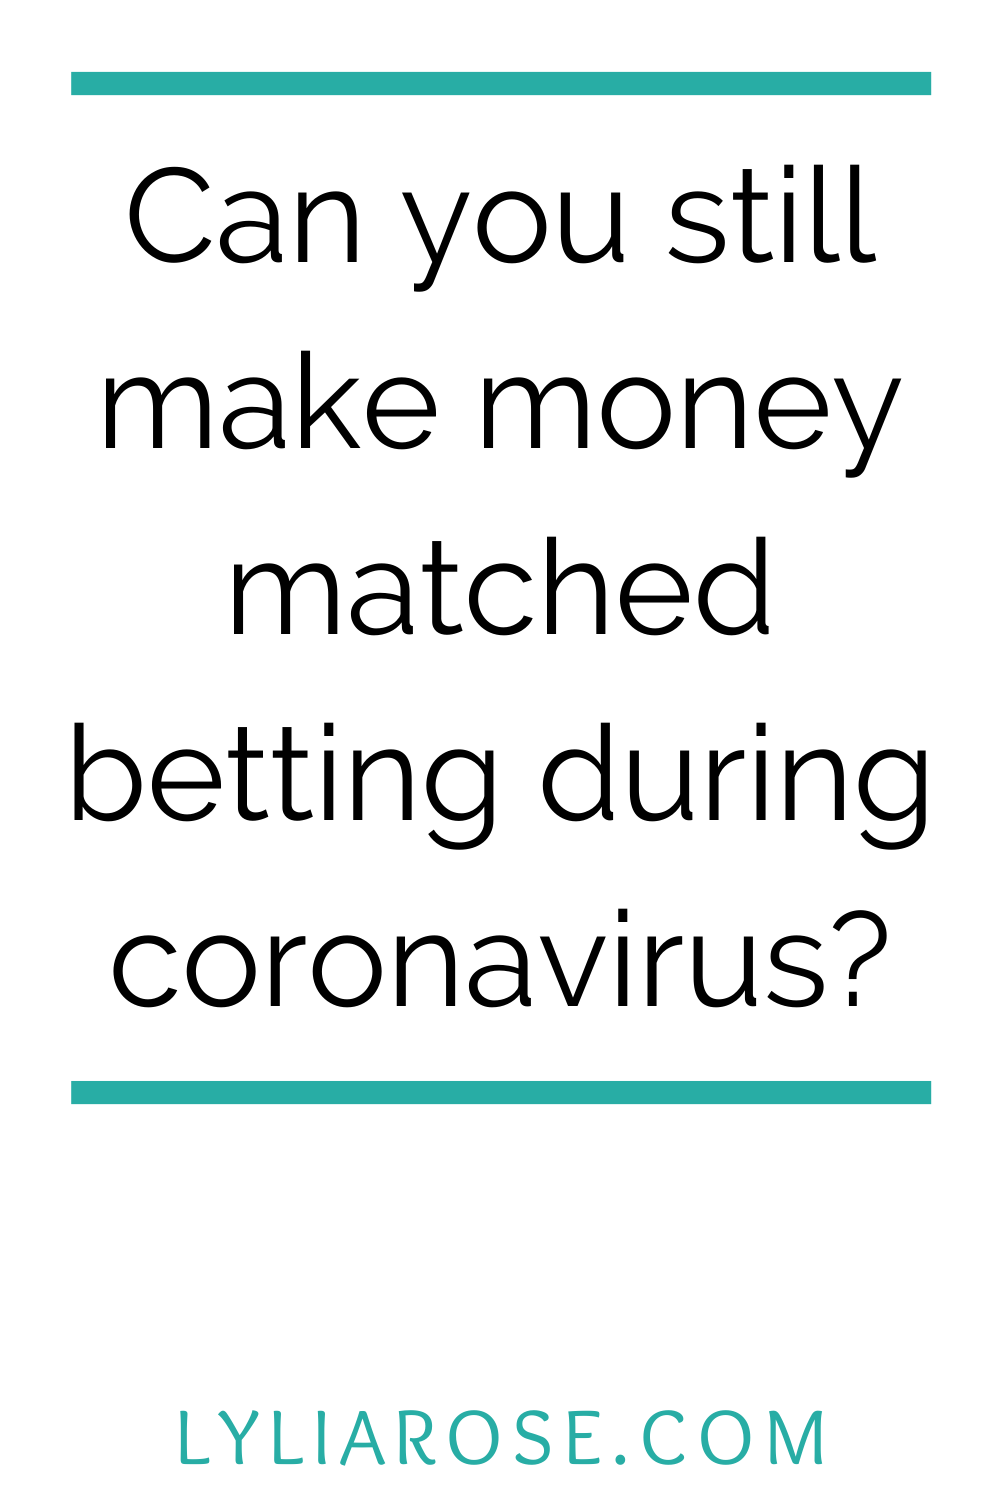 Can you still make money from matched betting during the coronavirus